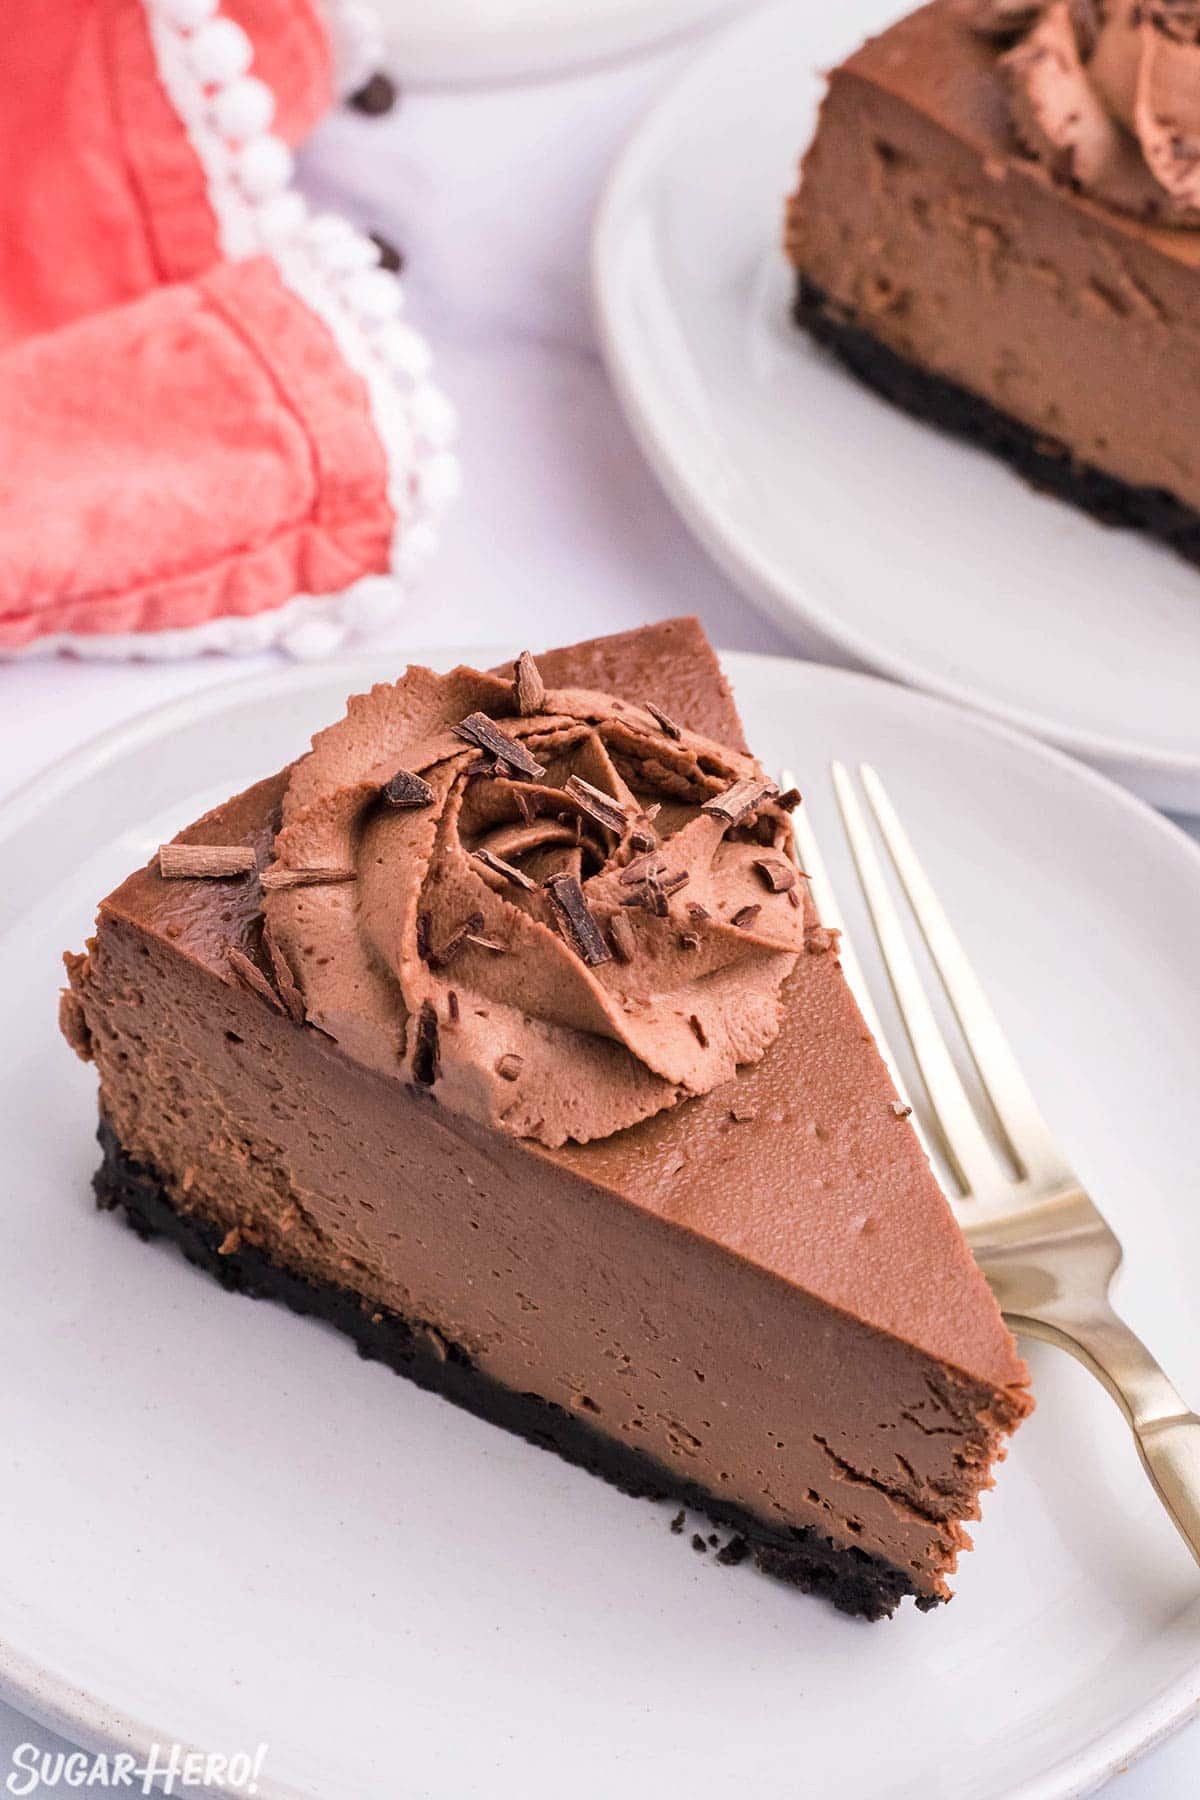 A slice of Chocolate Cheesecake on a white plate.